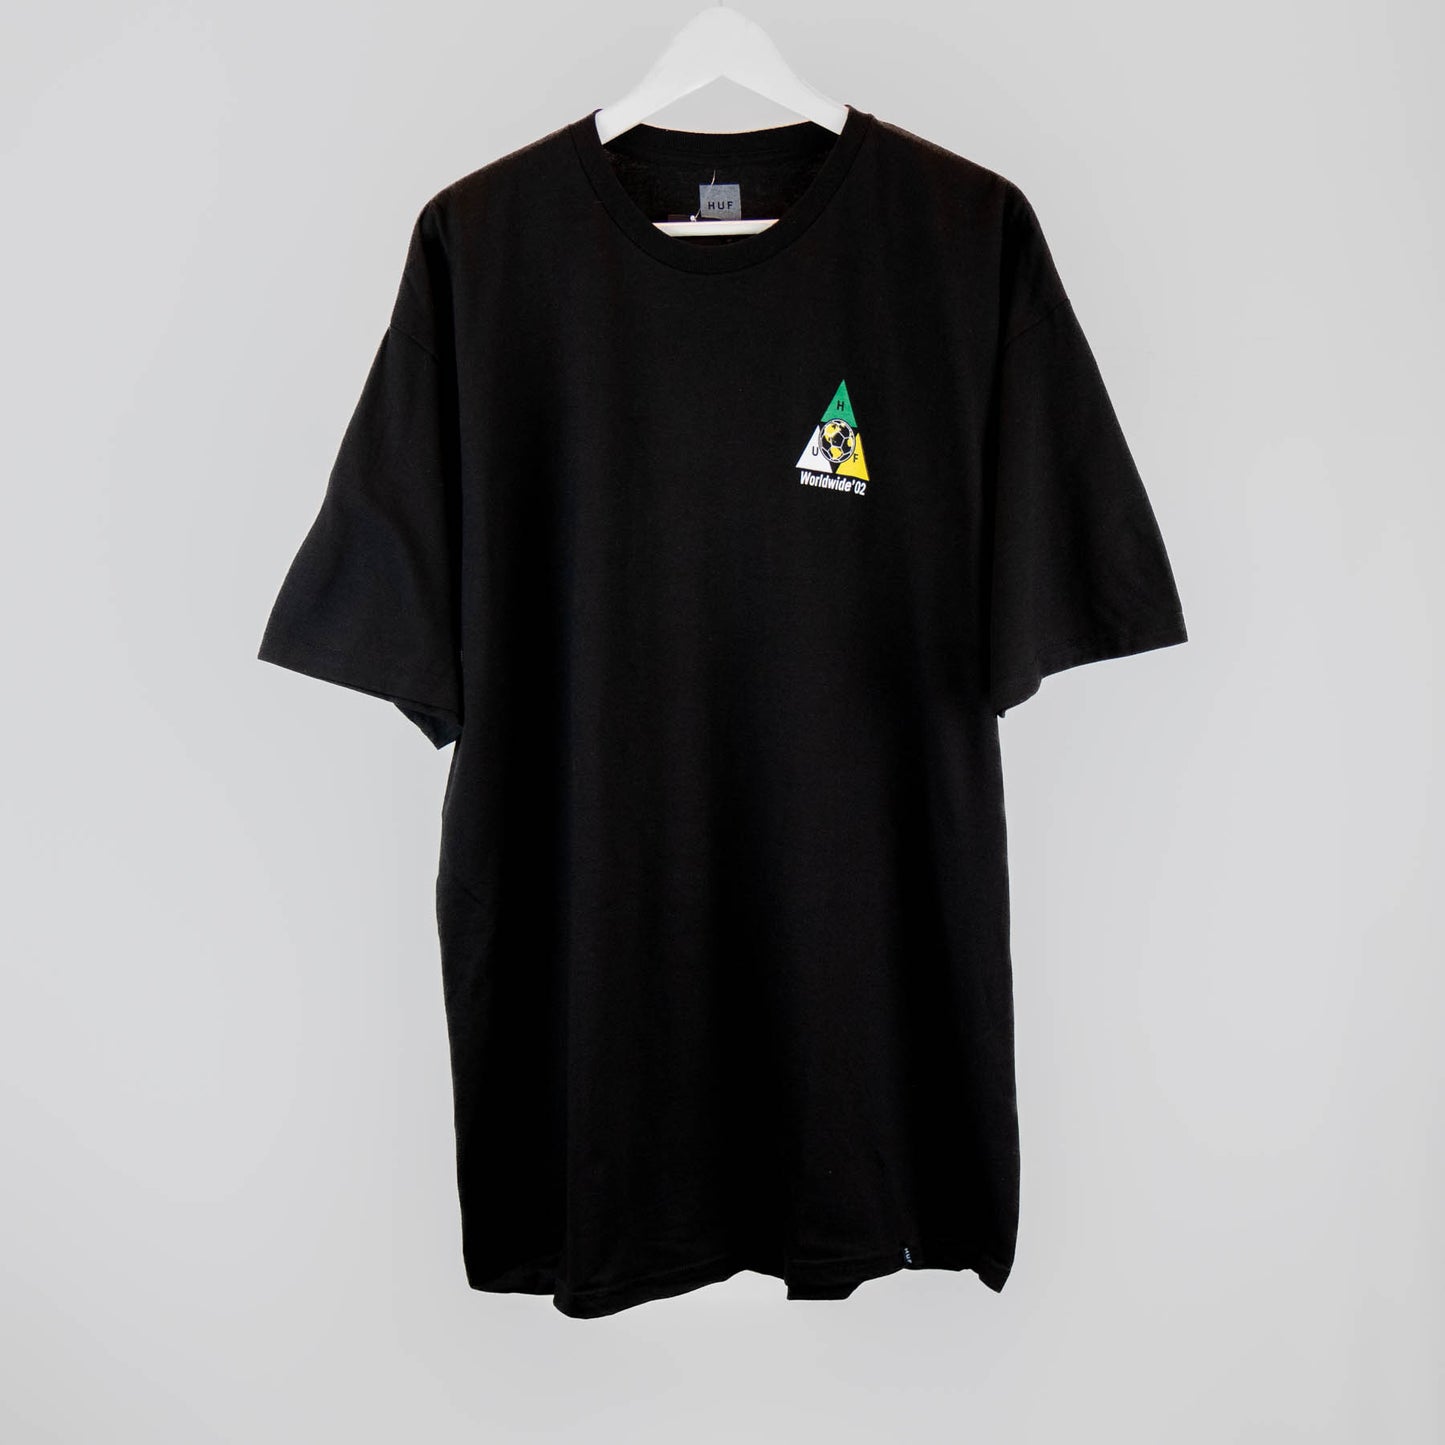 HUF - WC Takeover TT S/S Tee - Black